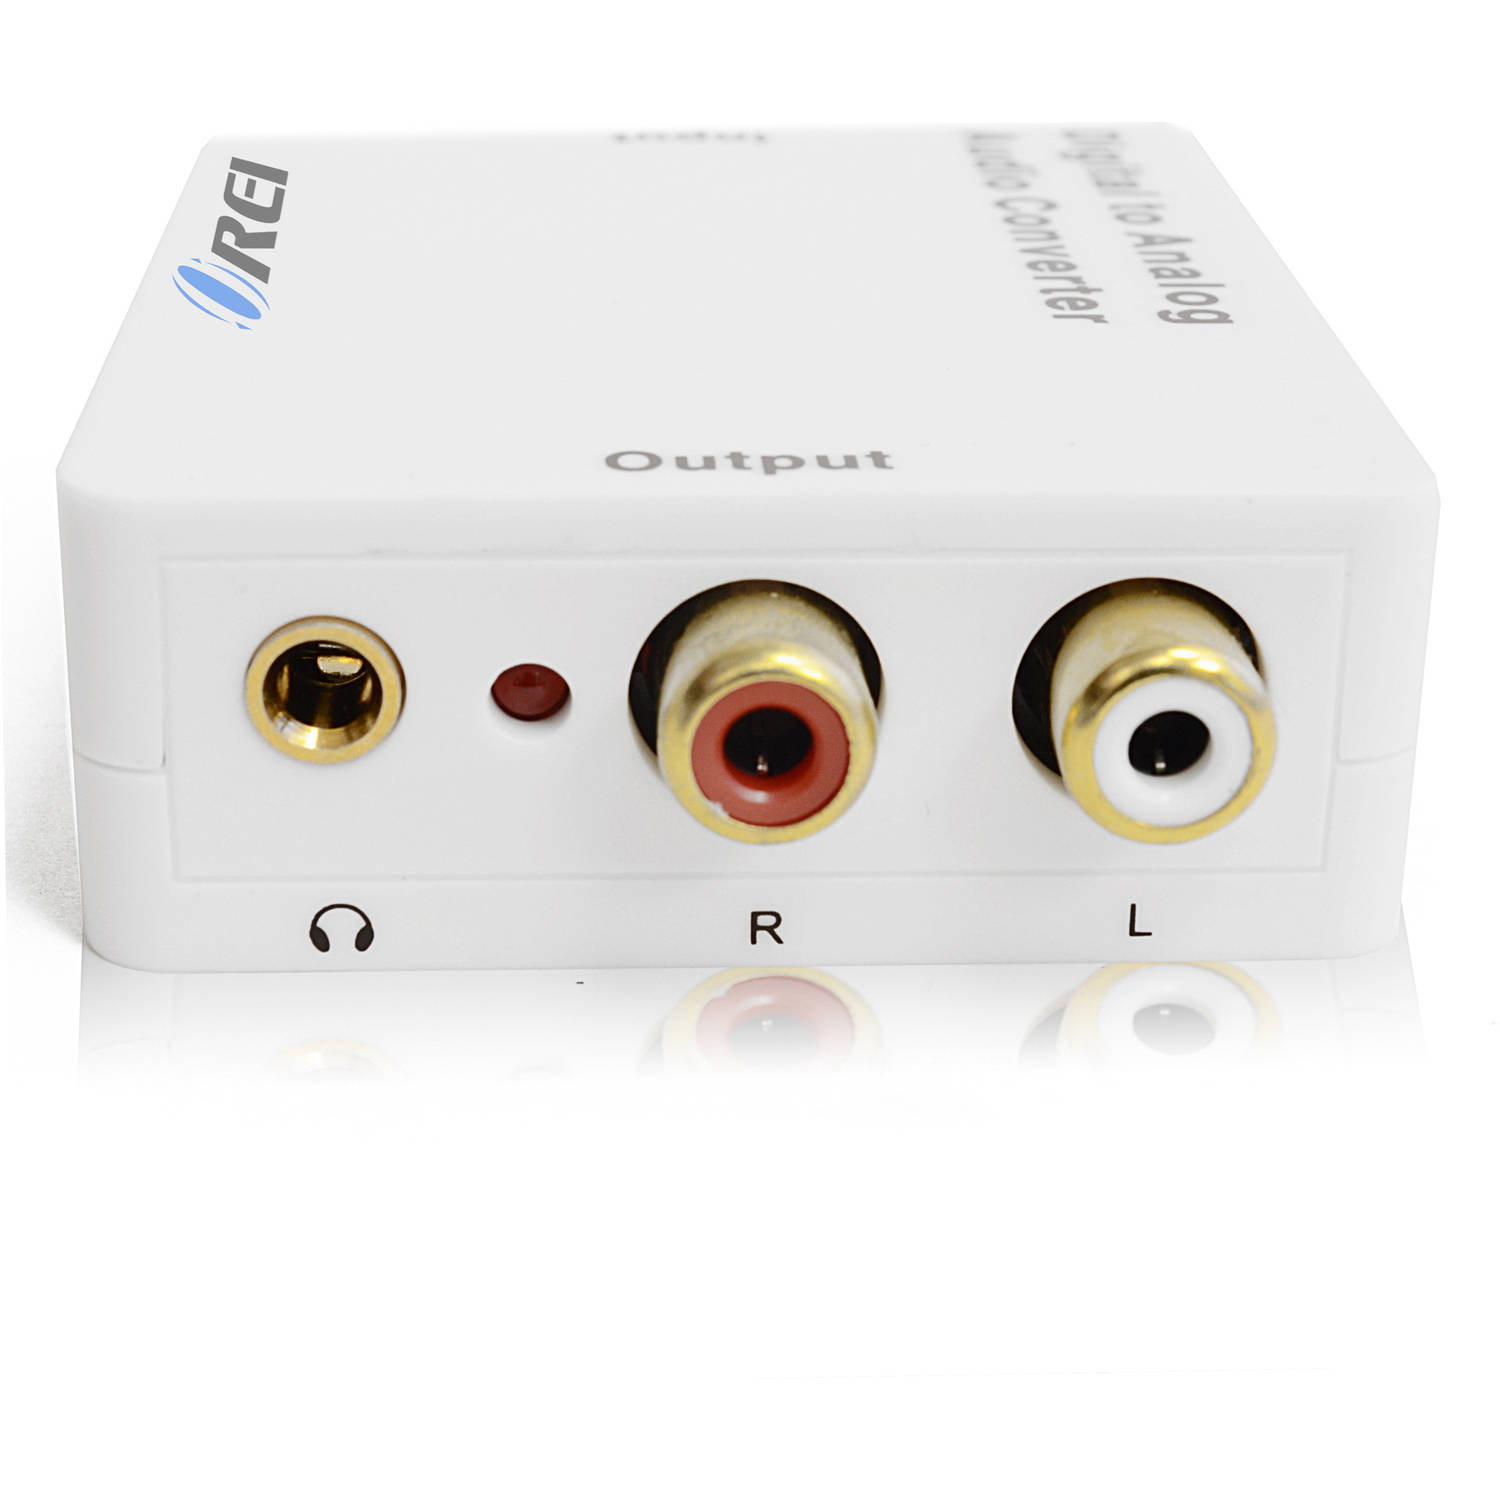 Orei DA21 Optical SPDIF/Coaxial Digital to RCA L/R Analog Audio Converter with 3.5mm Jack Support Headphone/Speaker Outputs - image 2 of 2